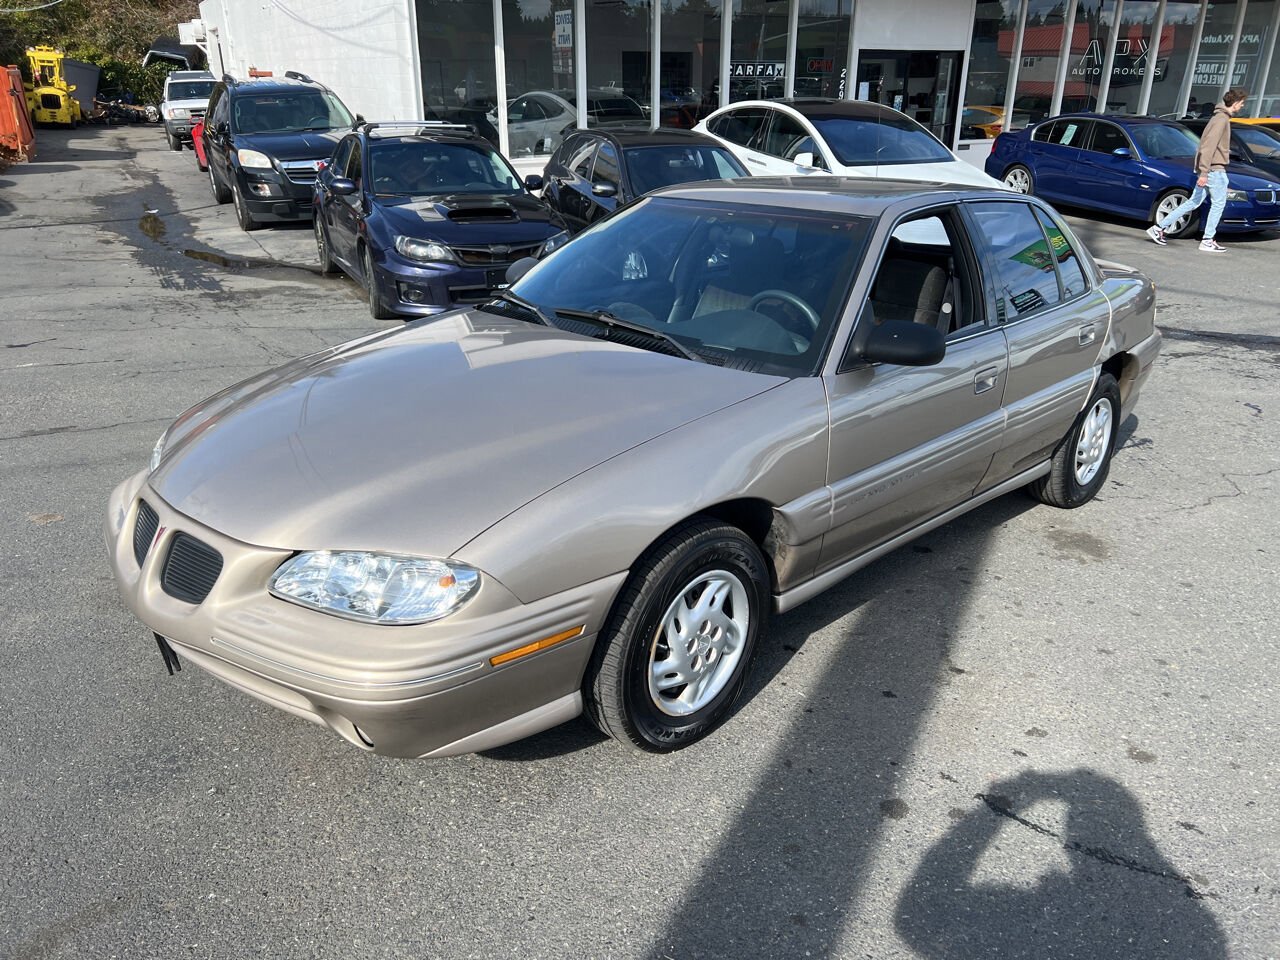 Used 1997 Pontiac Grand Am for Sale Right Now - Autotrader